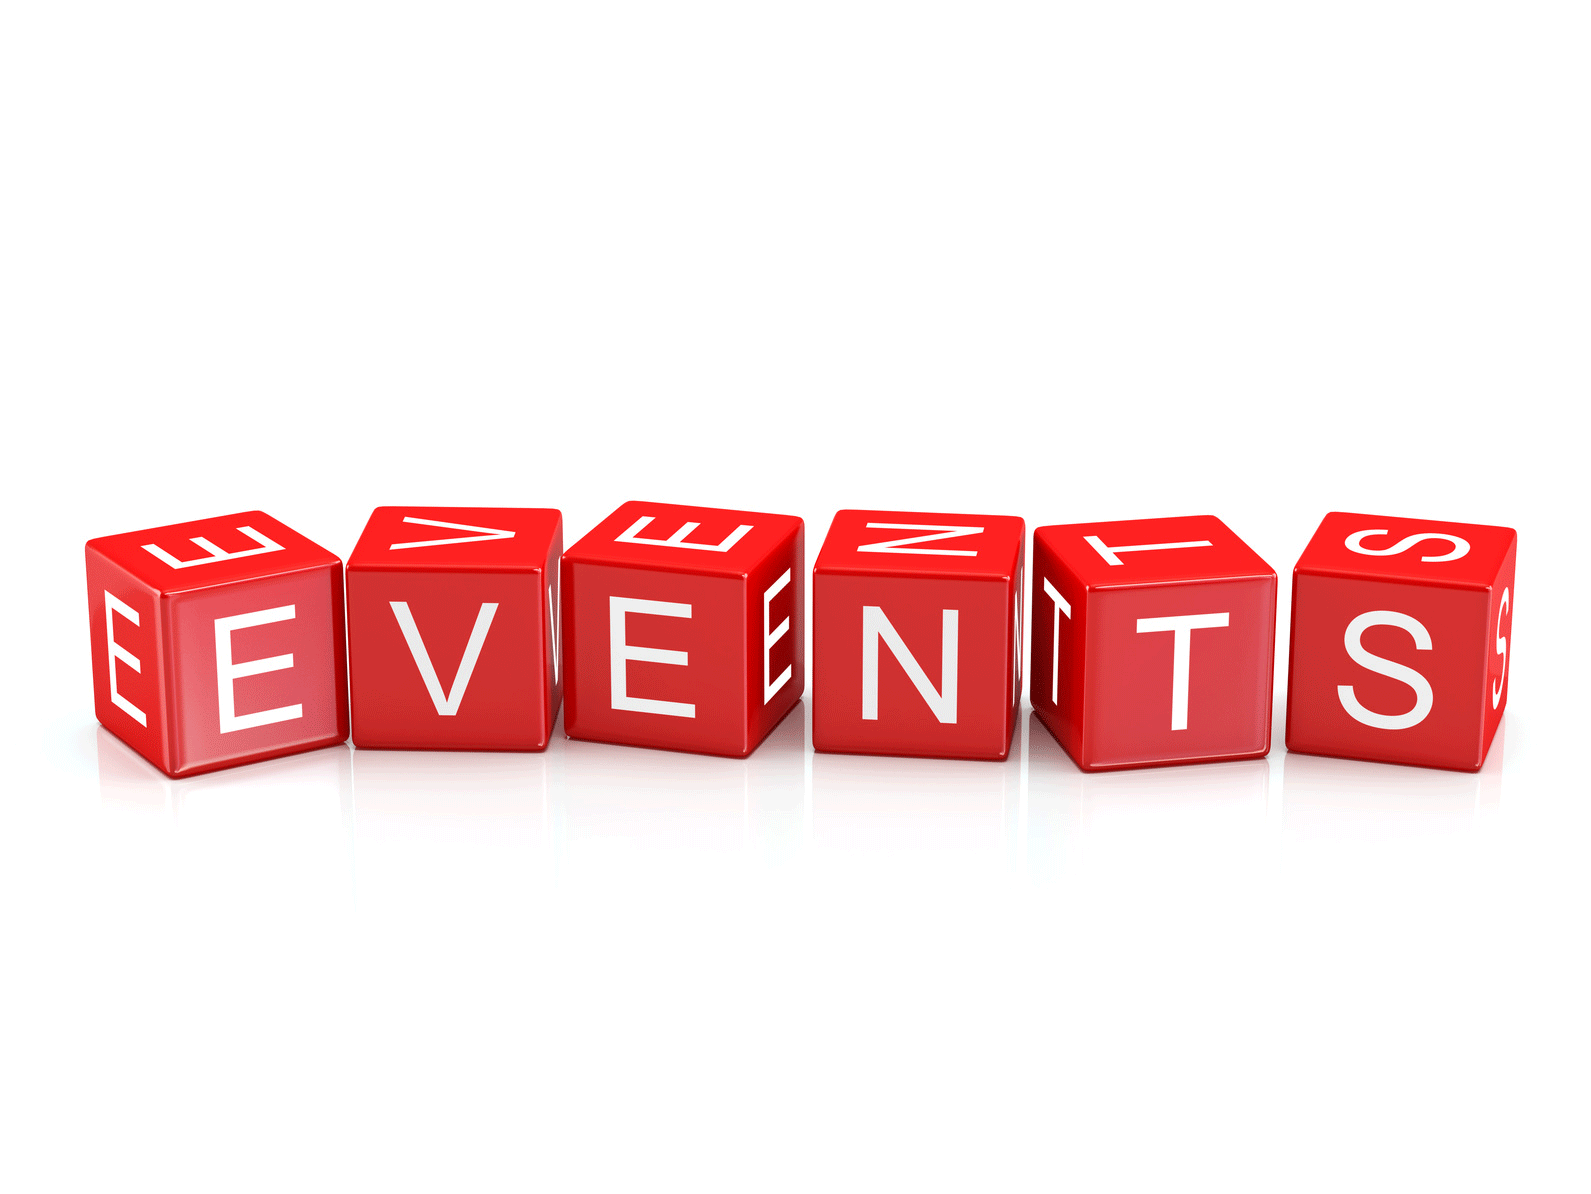 Red blocks with a white letter on each spelling out the word "Events".